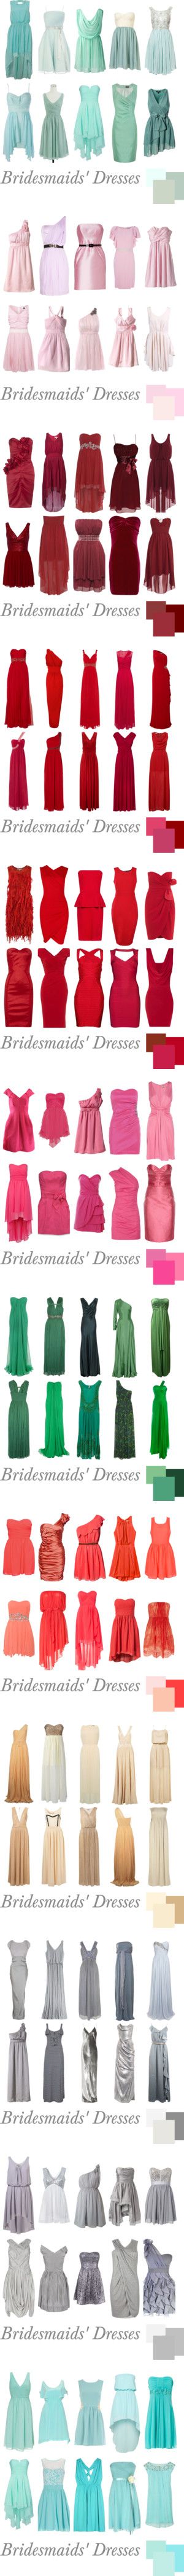 What an awesome chart for bridesmaids' dresses.